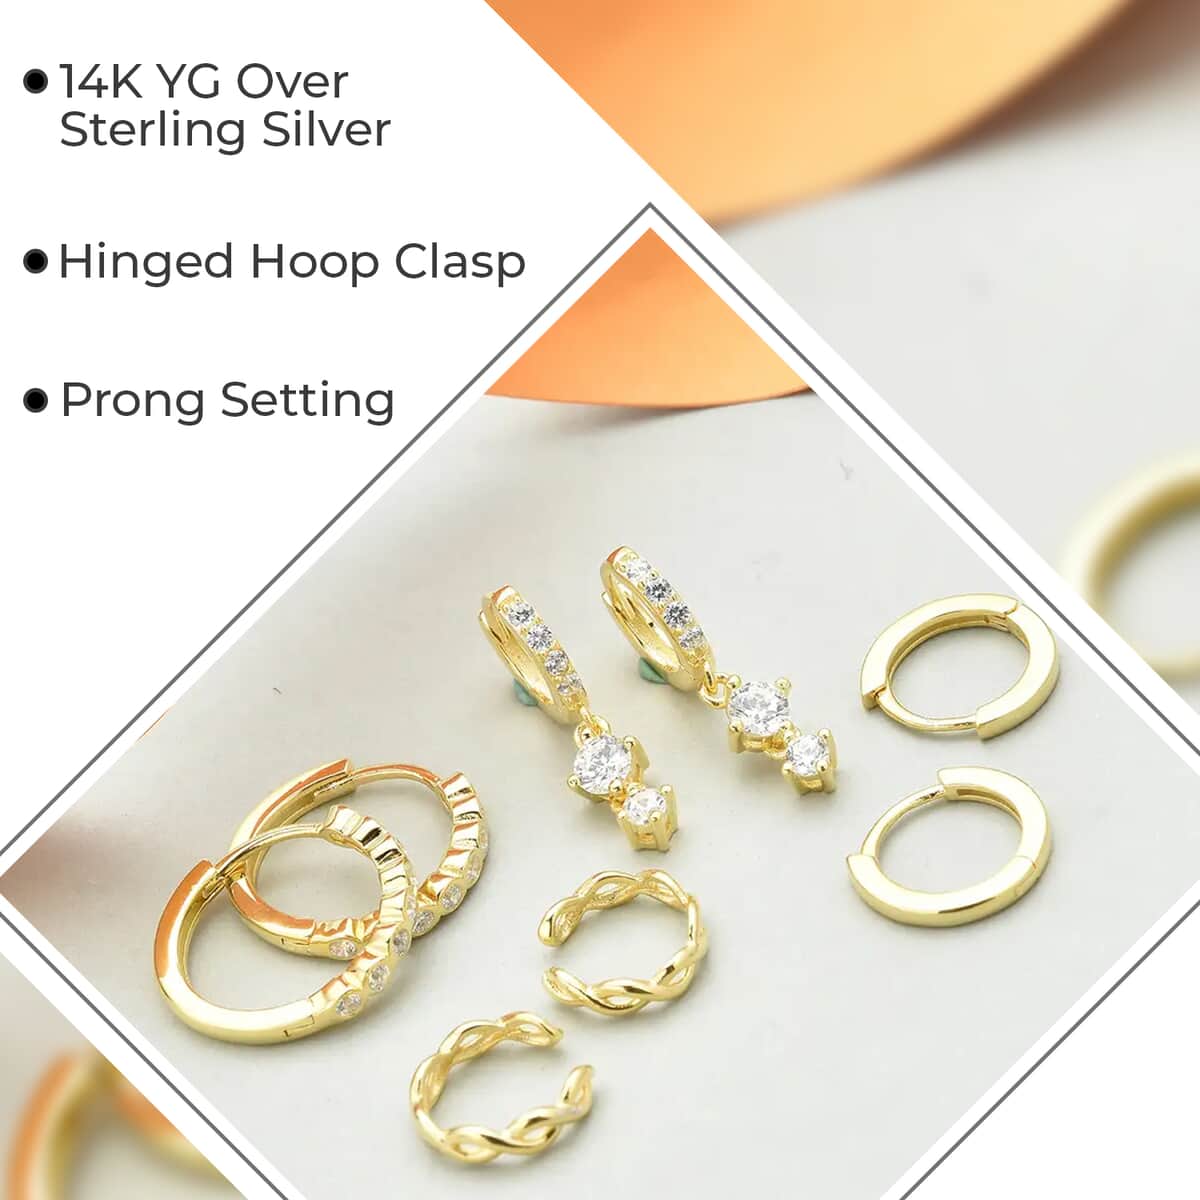 Ear Party, Set of 4 Simulated Diamond Earrings, 1 Hoops, 1 Studded & 1 Plain Huggies, 1 Criss-cross Ear Cuffs in 14K YG Over Sterling Silver 1.30 ctw image number 2